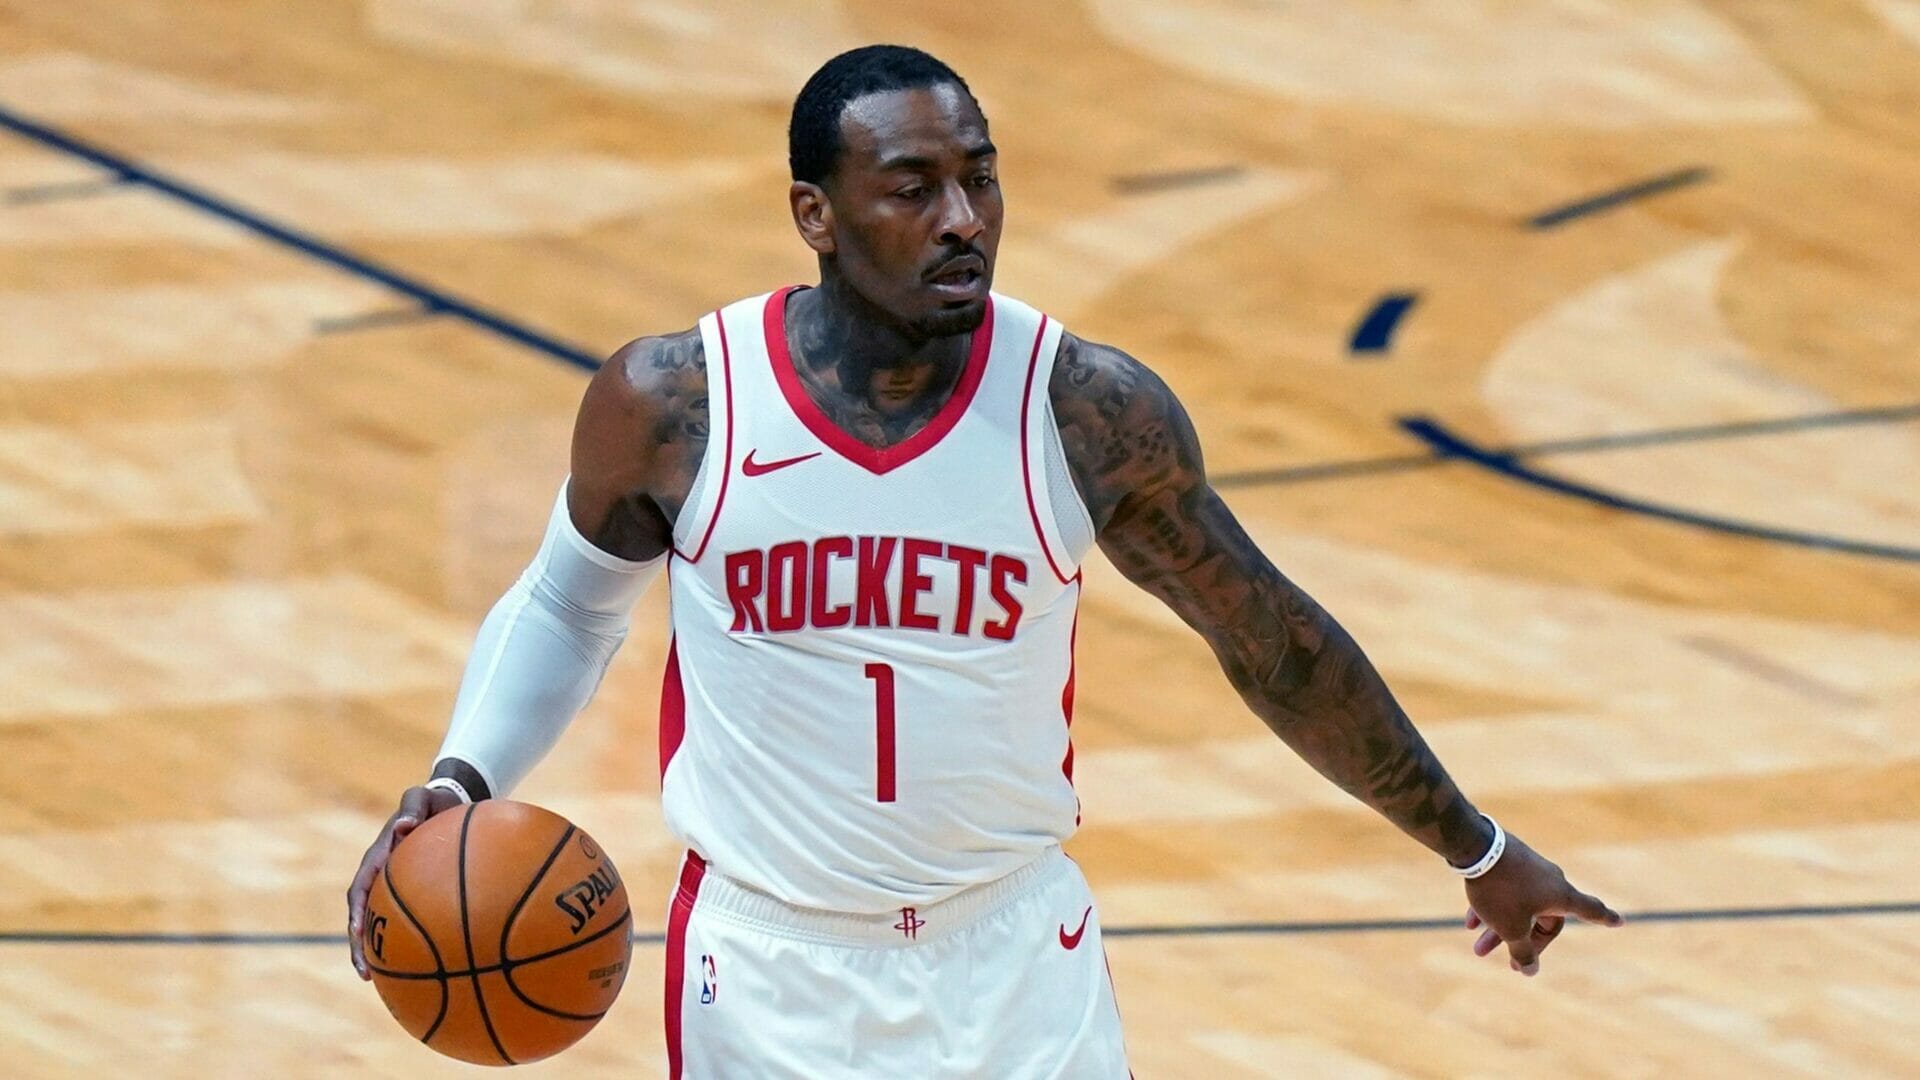 John Wall played for the Houston Rockets last season but is waiting to find a new NBA home for the 2021-2022 season. (Carmen Mandato/Getty Images) NBA News